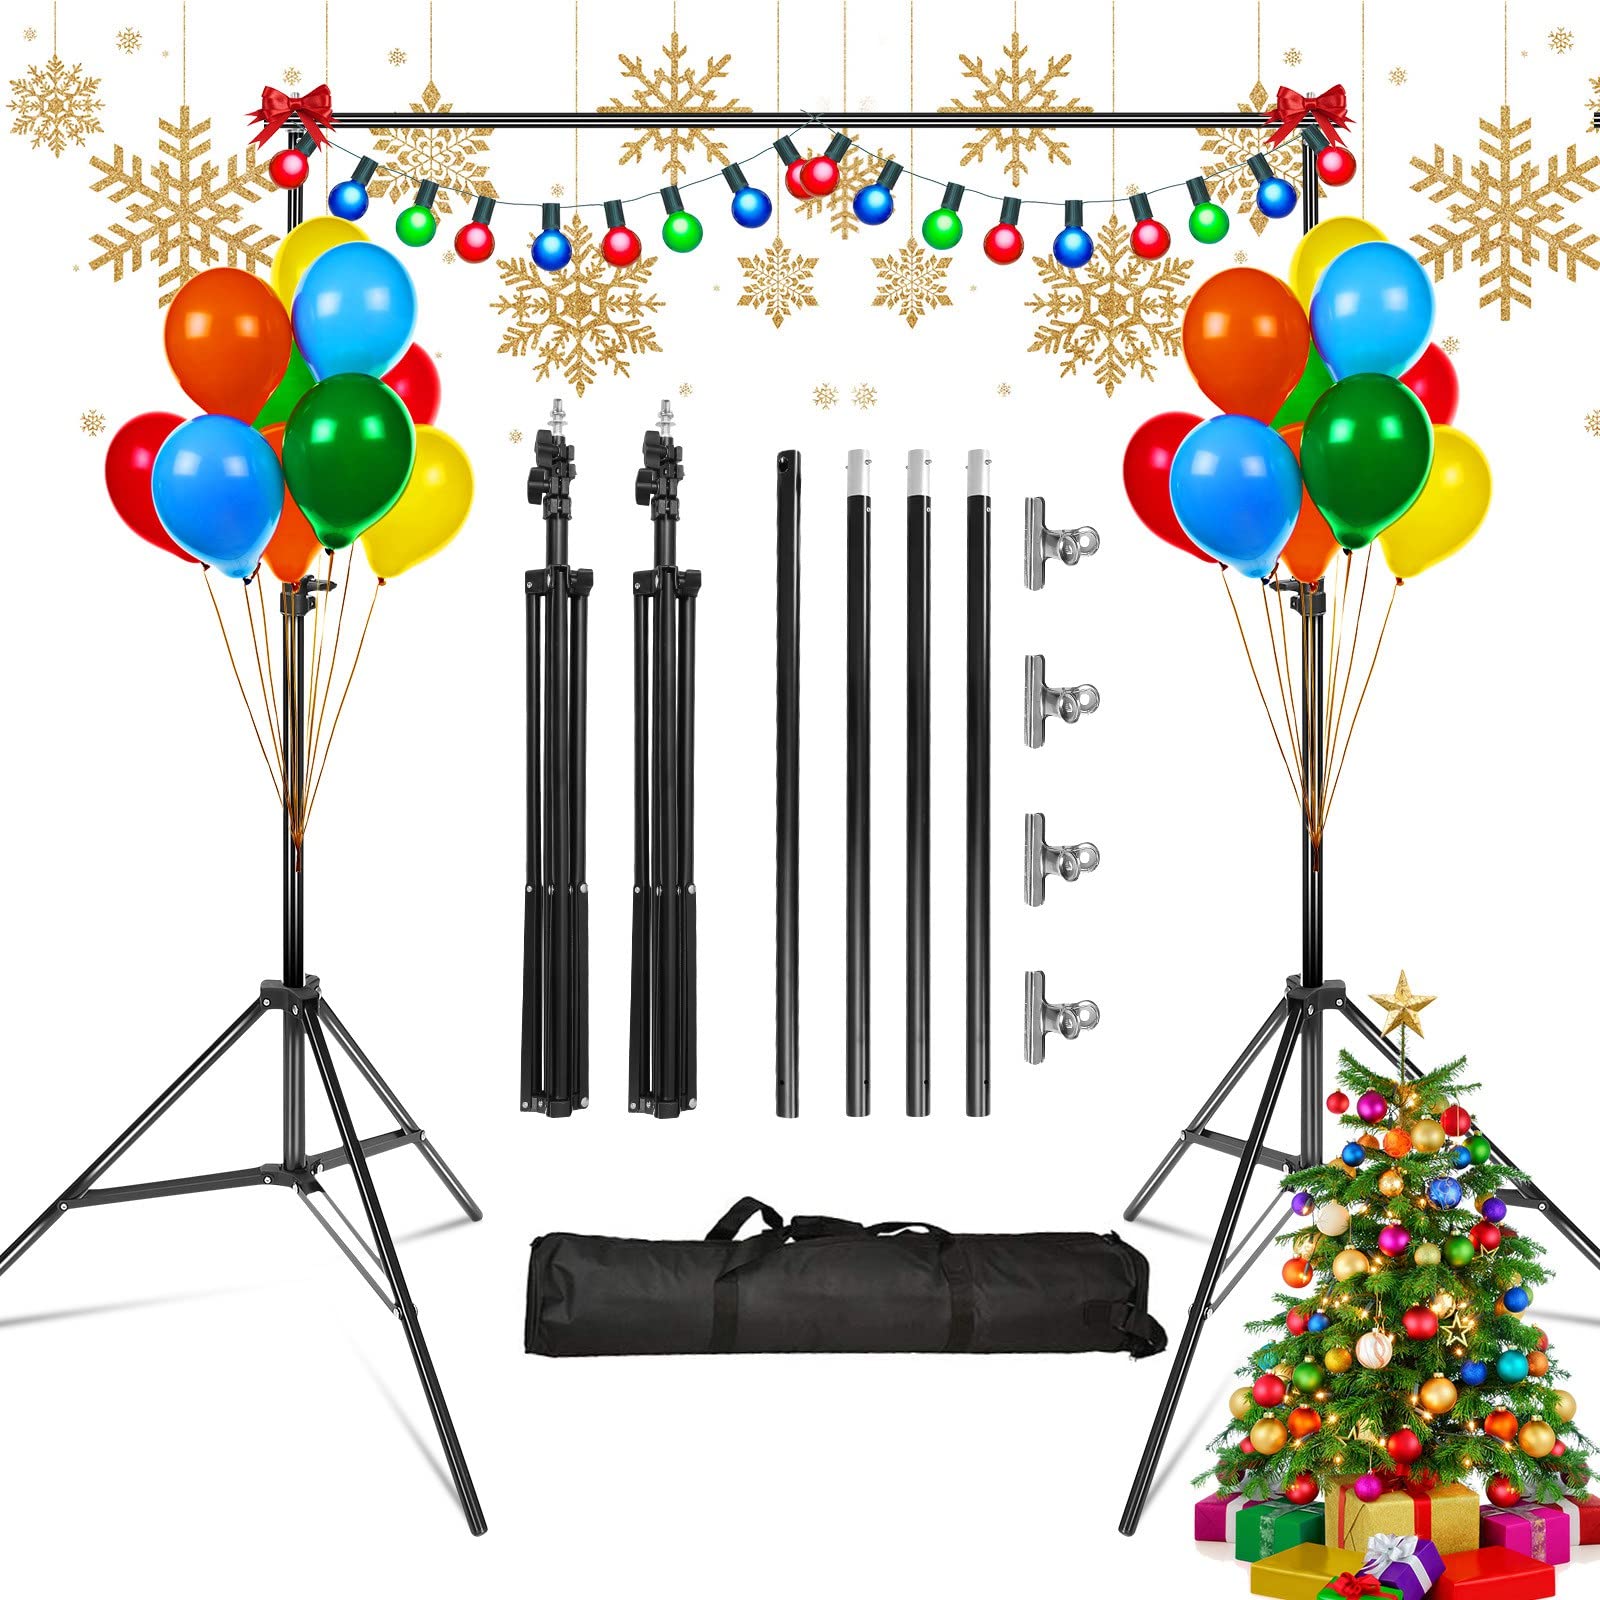 iMounTEK Backdrop Stand for Parties, Photographic Studio Photo Backgrounds 10ft Adjustable Photo Backdrop Stand Kits with a Carrying Bag Photo Backdrop Stand for Photography/Wedding